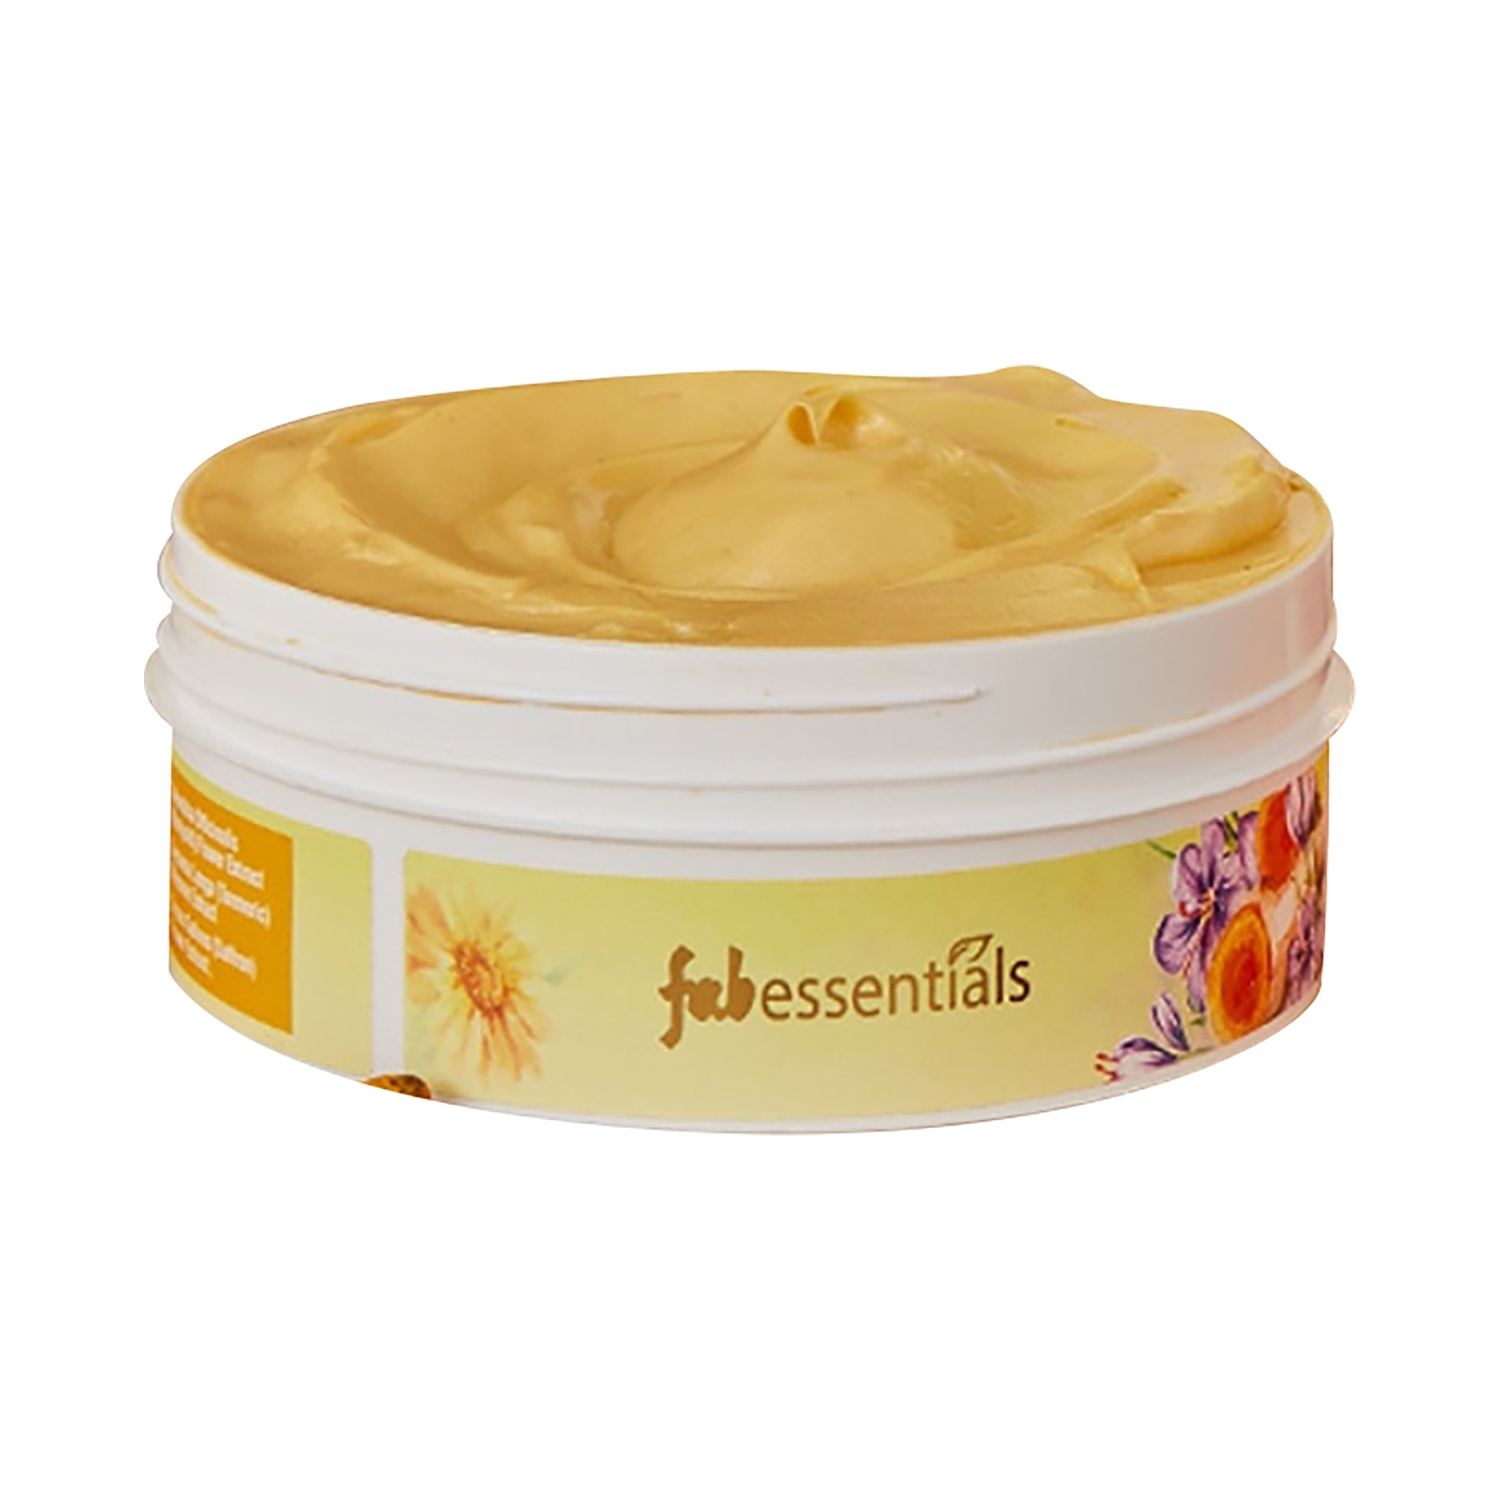 Fabessentials by Fabindia | Fabessentials by Fabindia Turmeric Saffron Marigold Body Butter (200g)